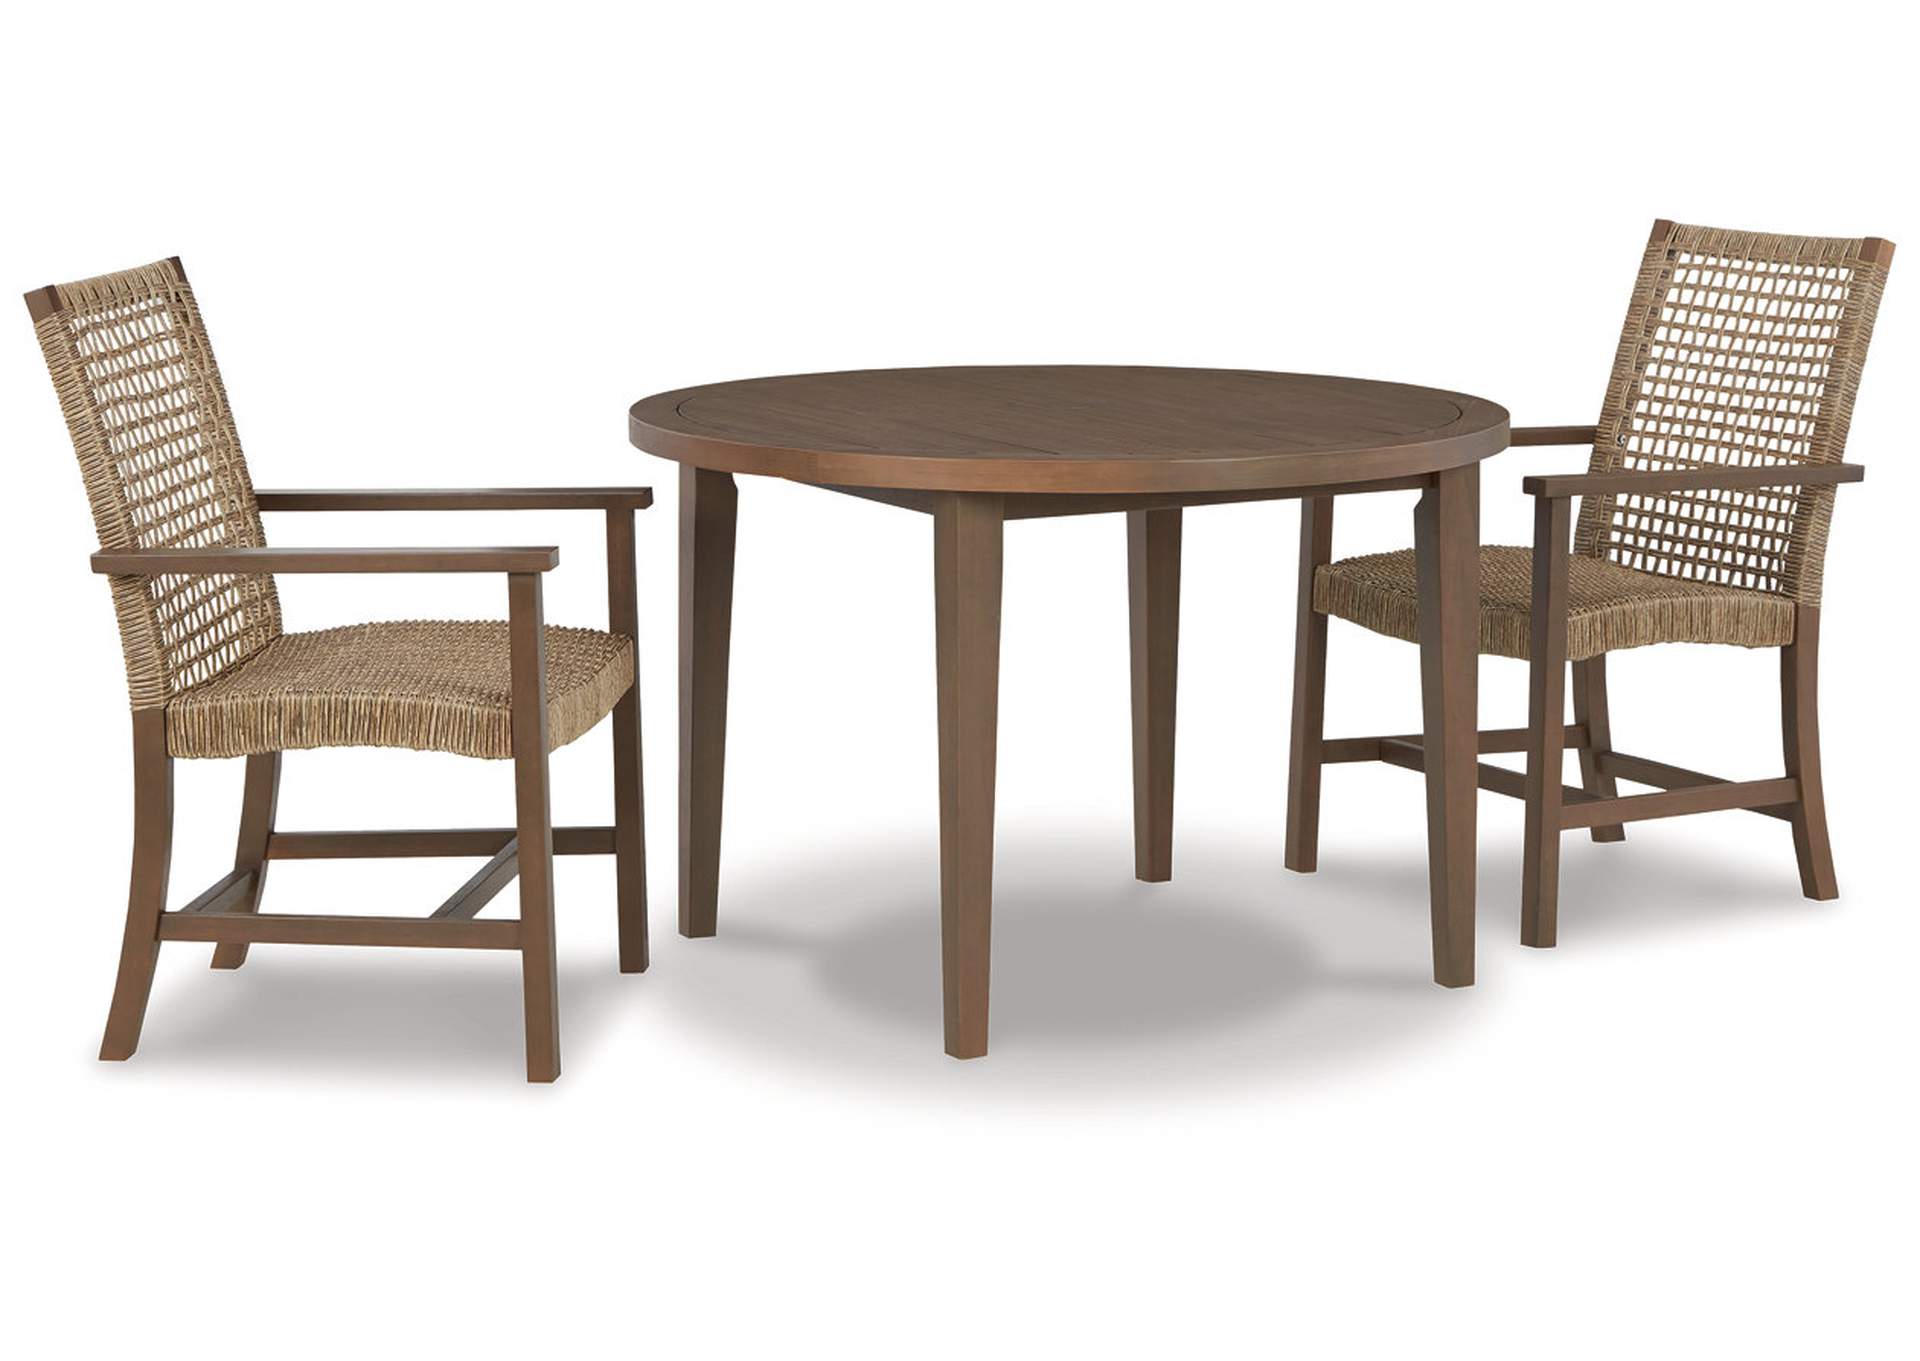 Germalia Outdoor Dining Table and 2 Chairs,Outdoor By Ashley